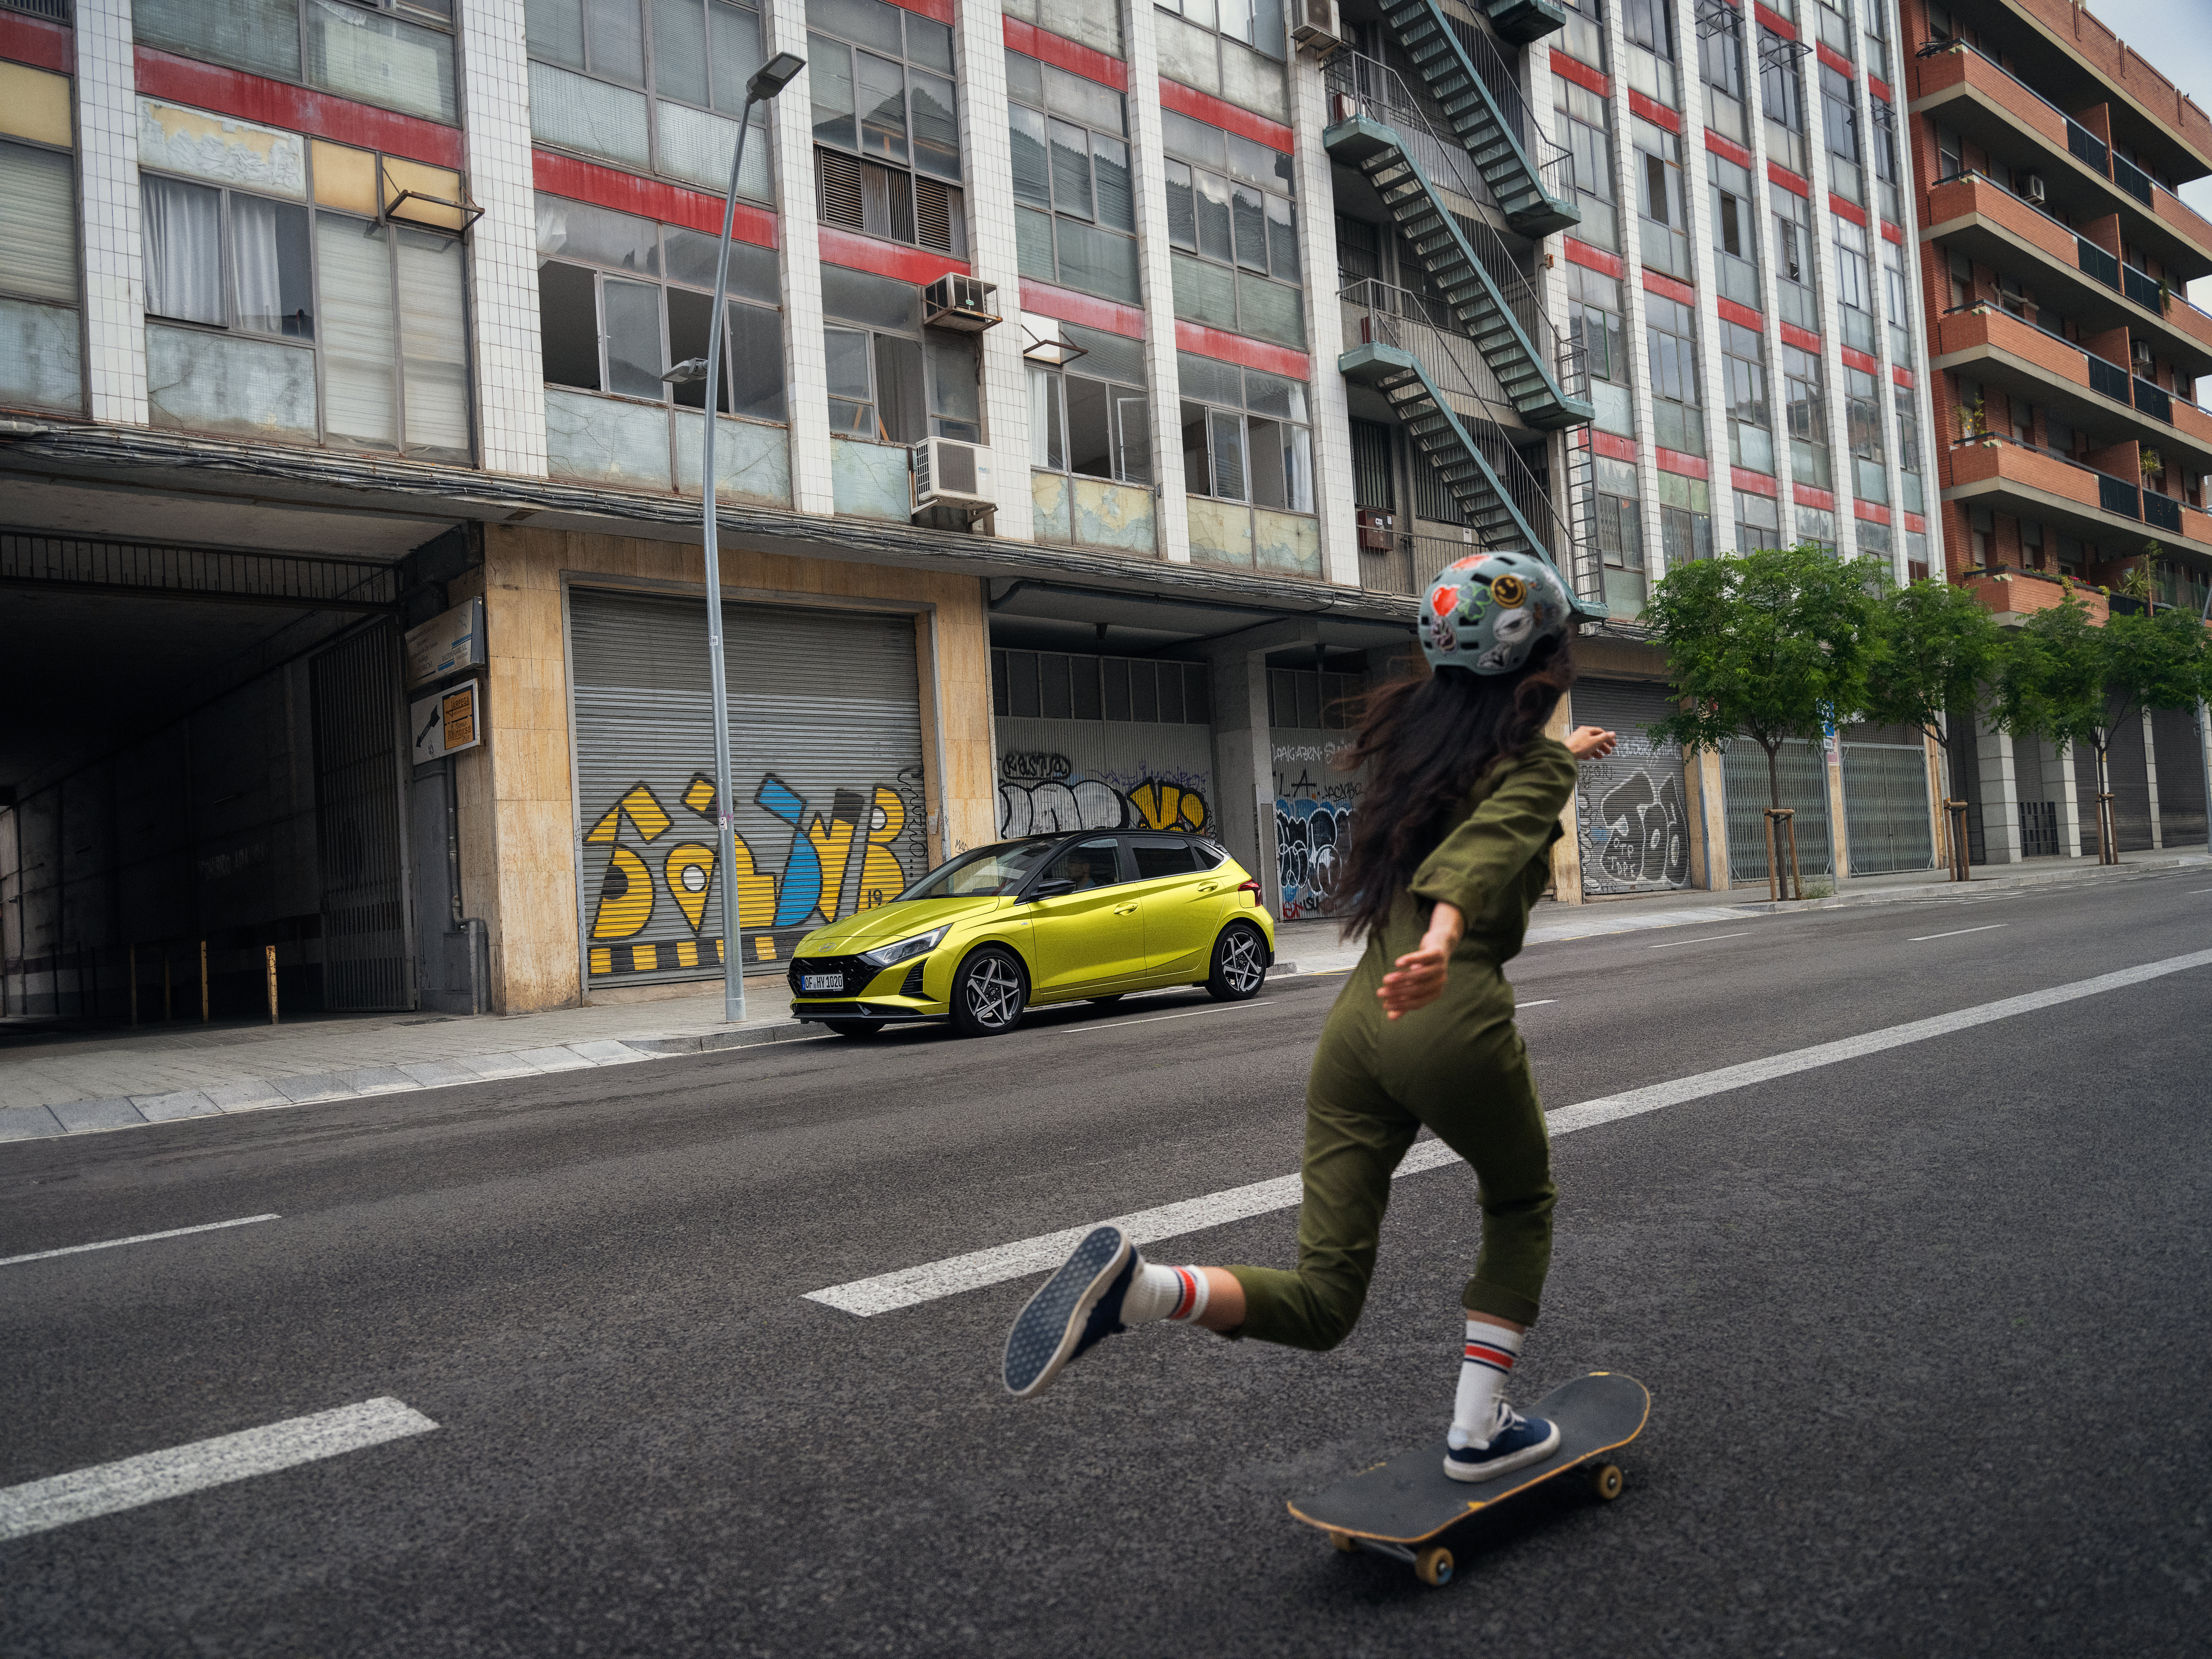 A young woman skateboarding in the street with a Hyundai i20 in the background.	